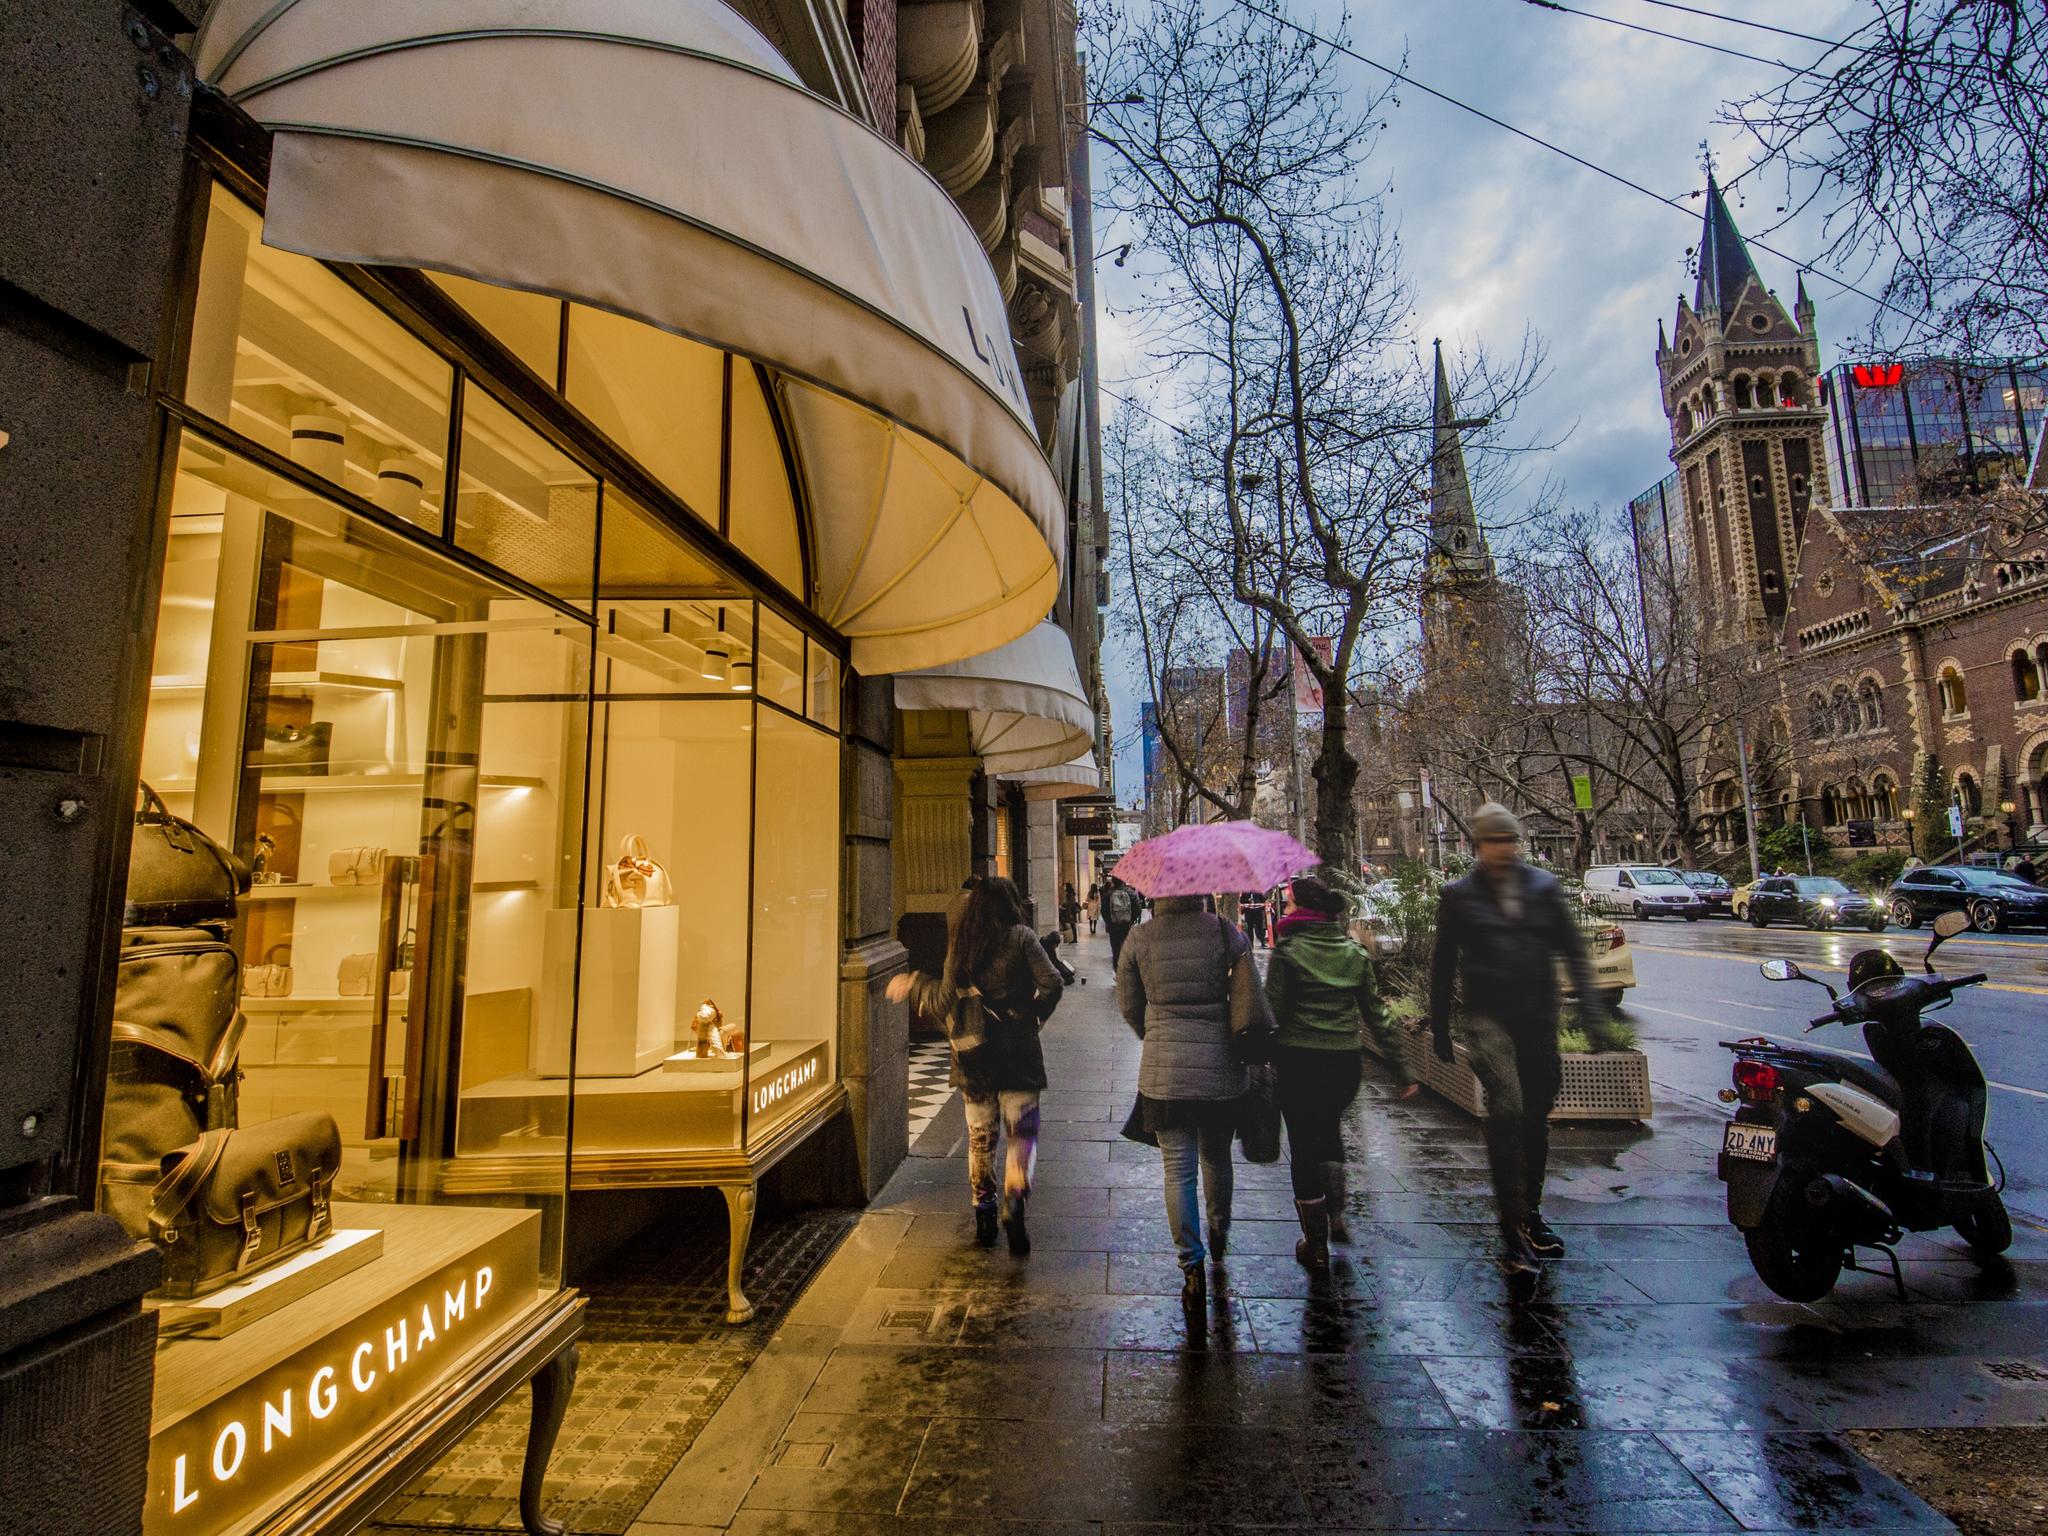 The Luis Vuitton Store in Collins Street Melbourne.The Victorian